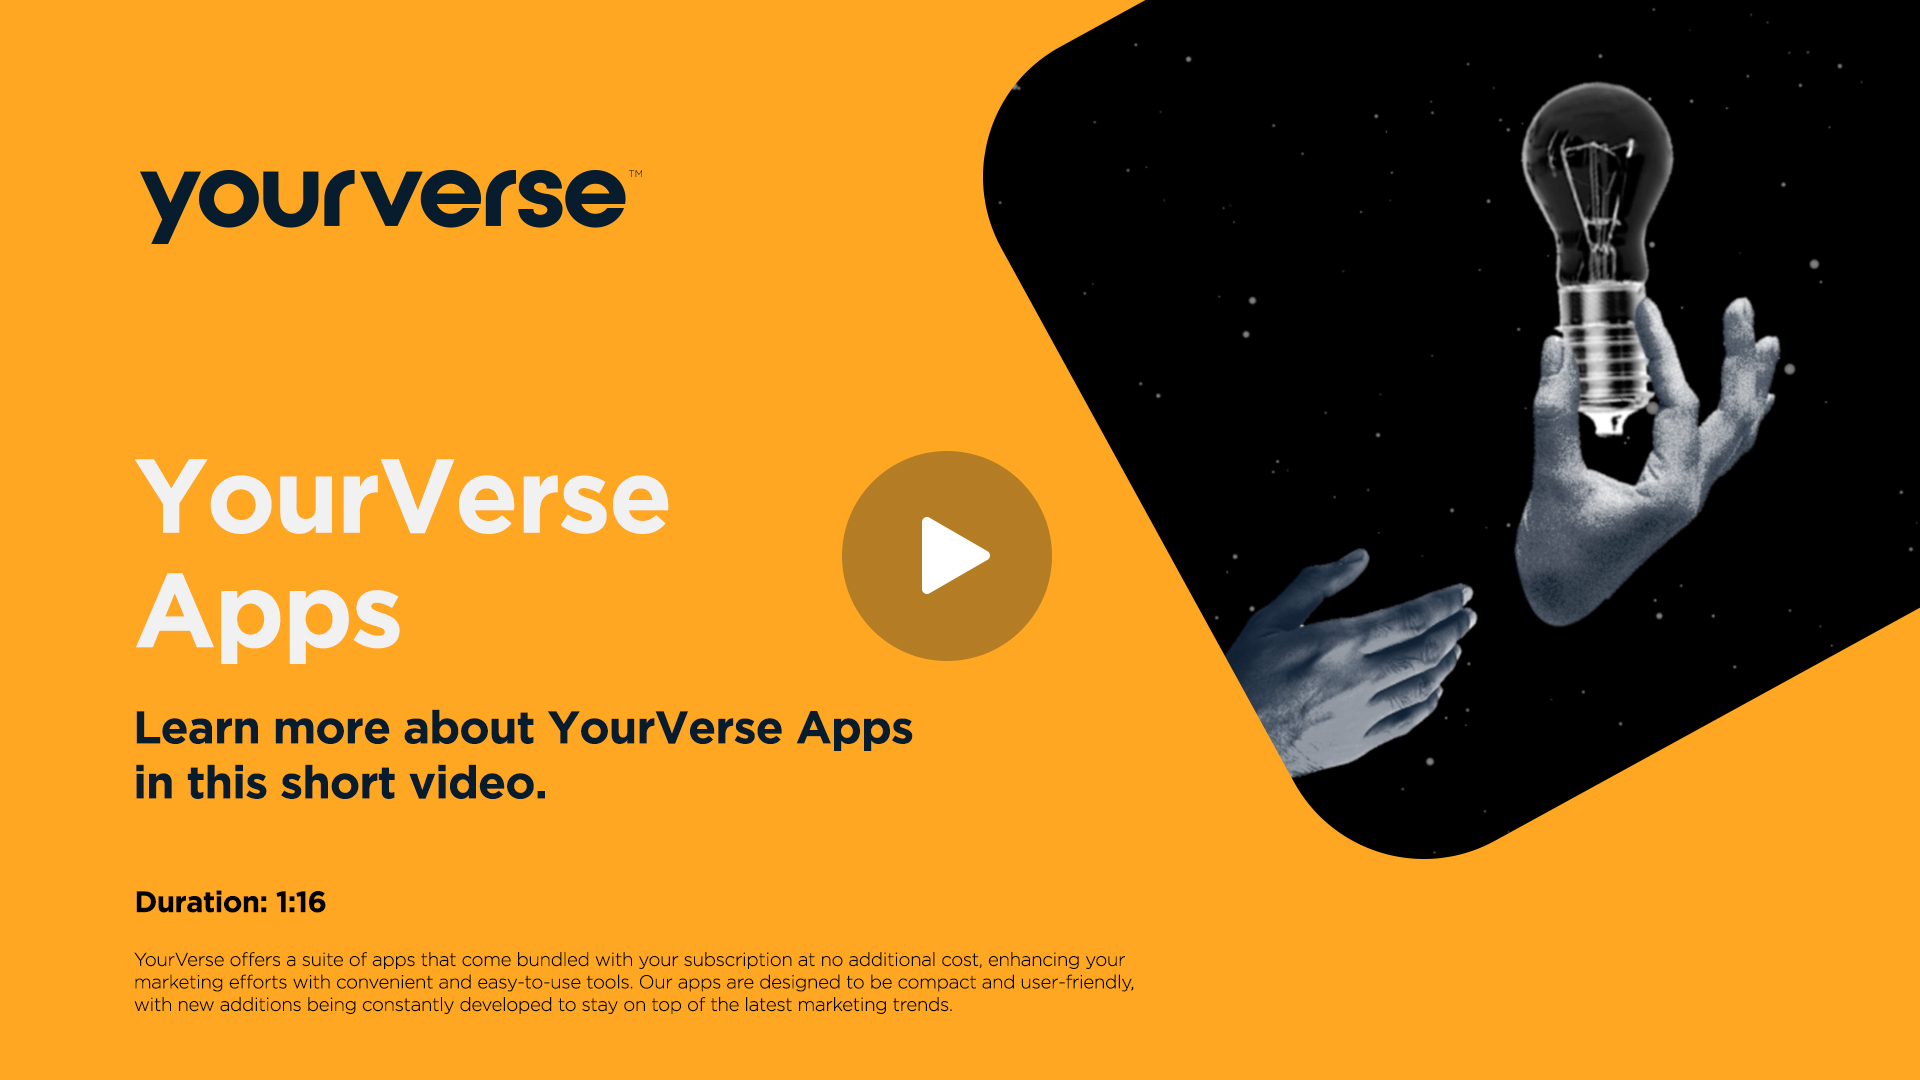 YourVerse Apps